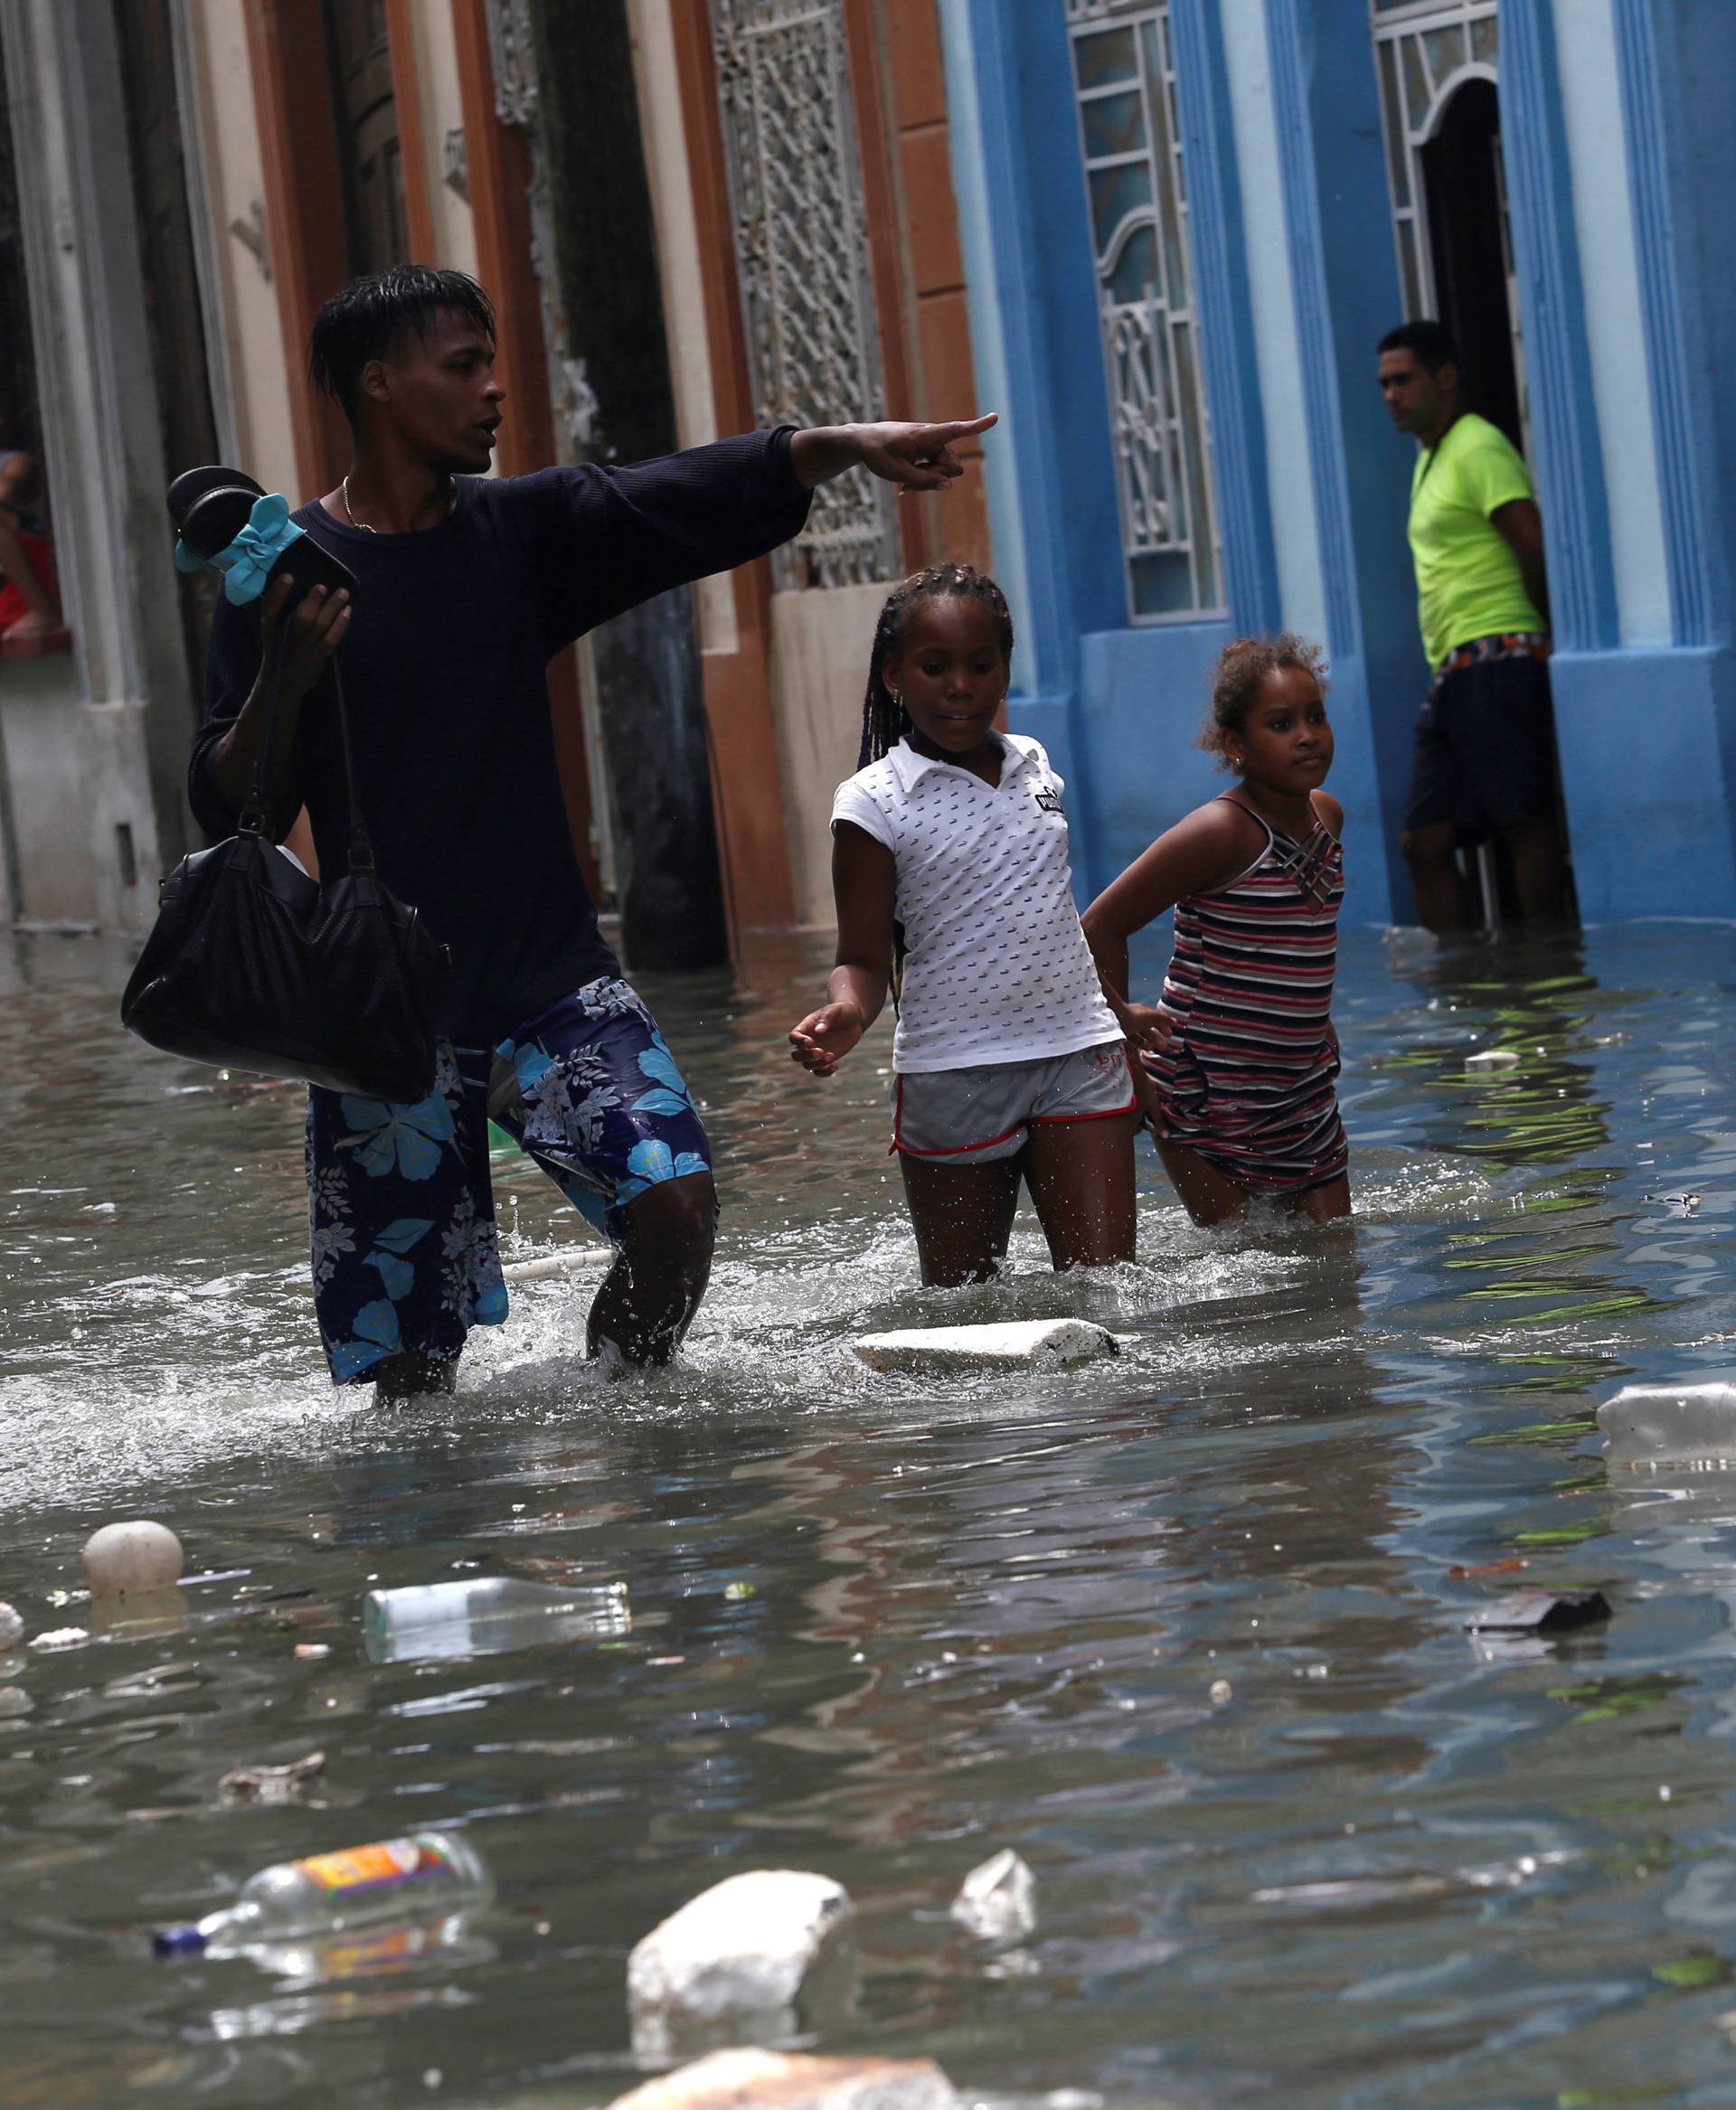 A man and two children wade through a flooded street,  after the passing of Hurricane Irma, in Havana